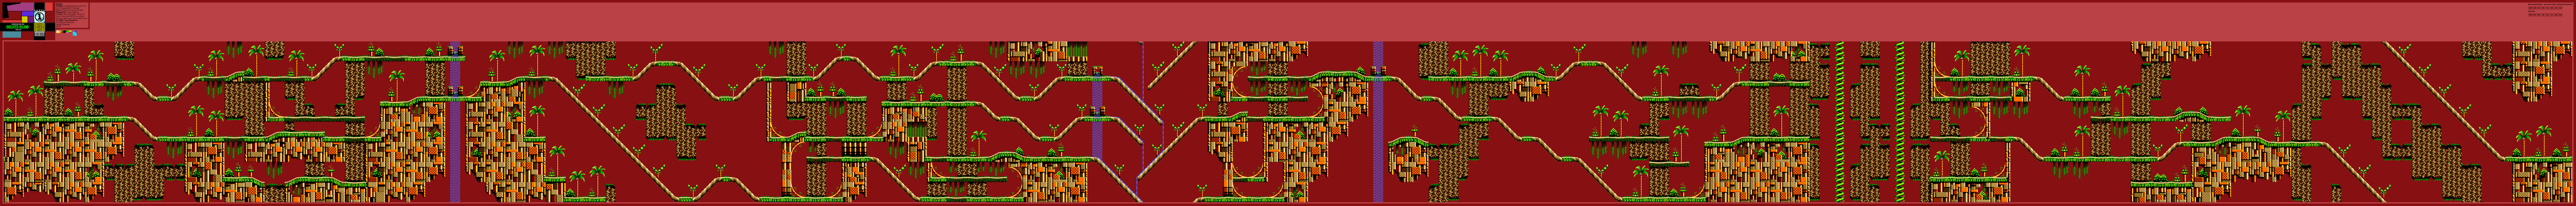 Knuckles' Chaotix (32X) - Isolated Island (Training) Levels 0 & 1 (Day)